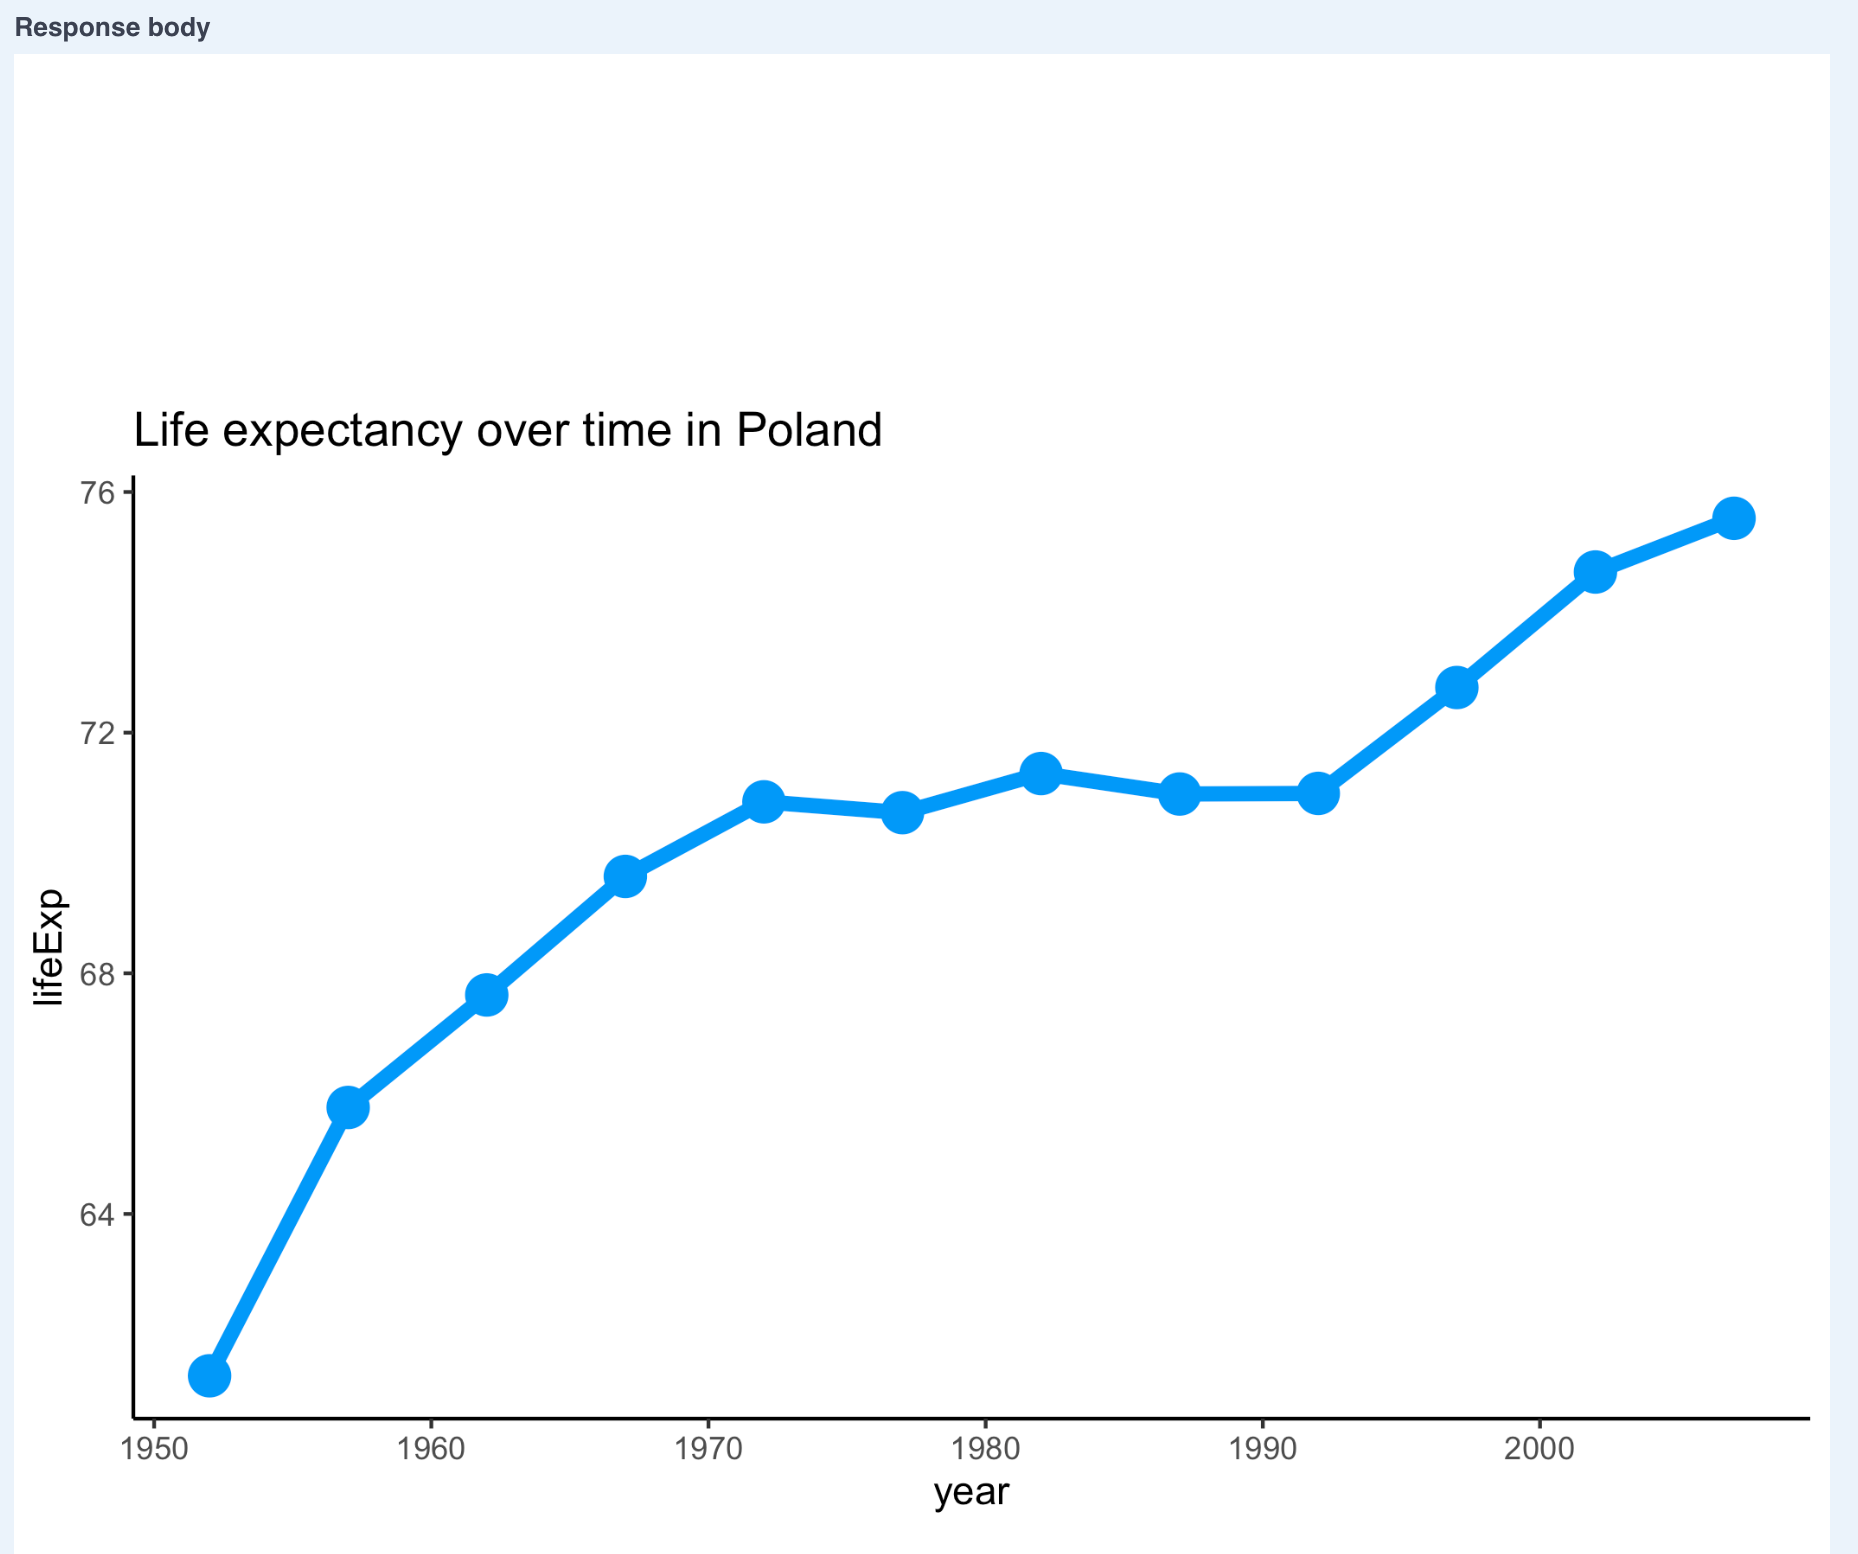 Image 8 - Life expectancy in Poland over time